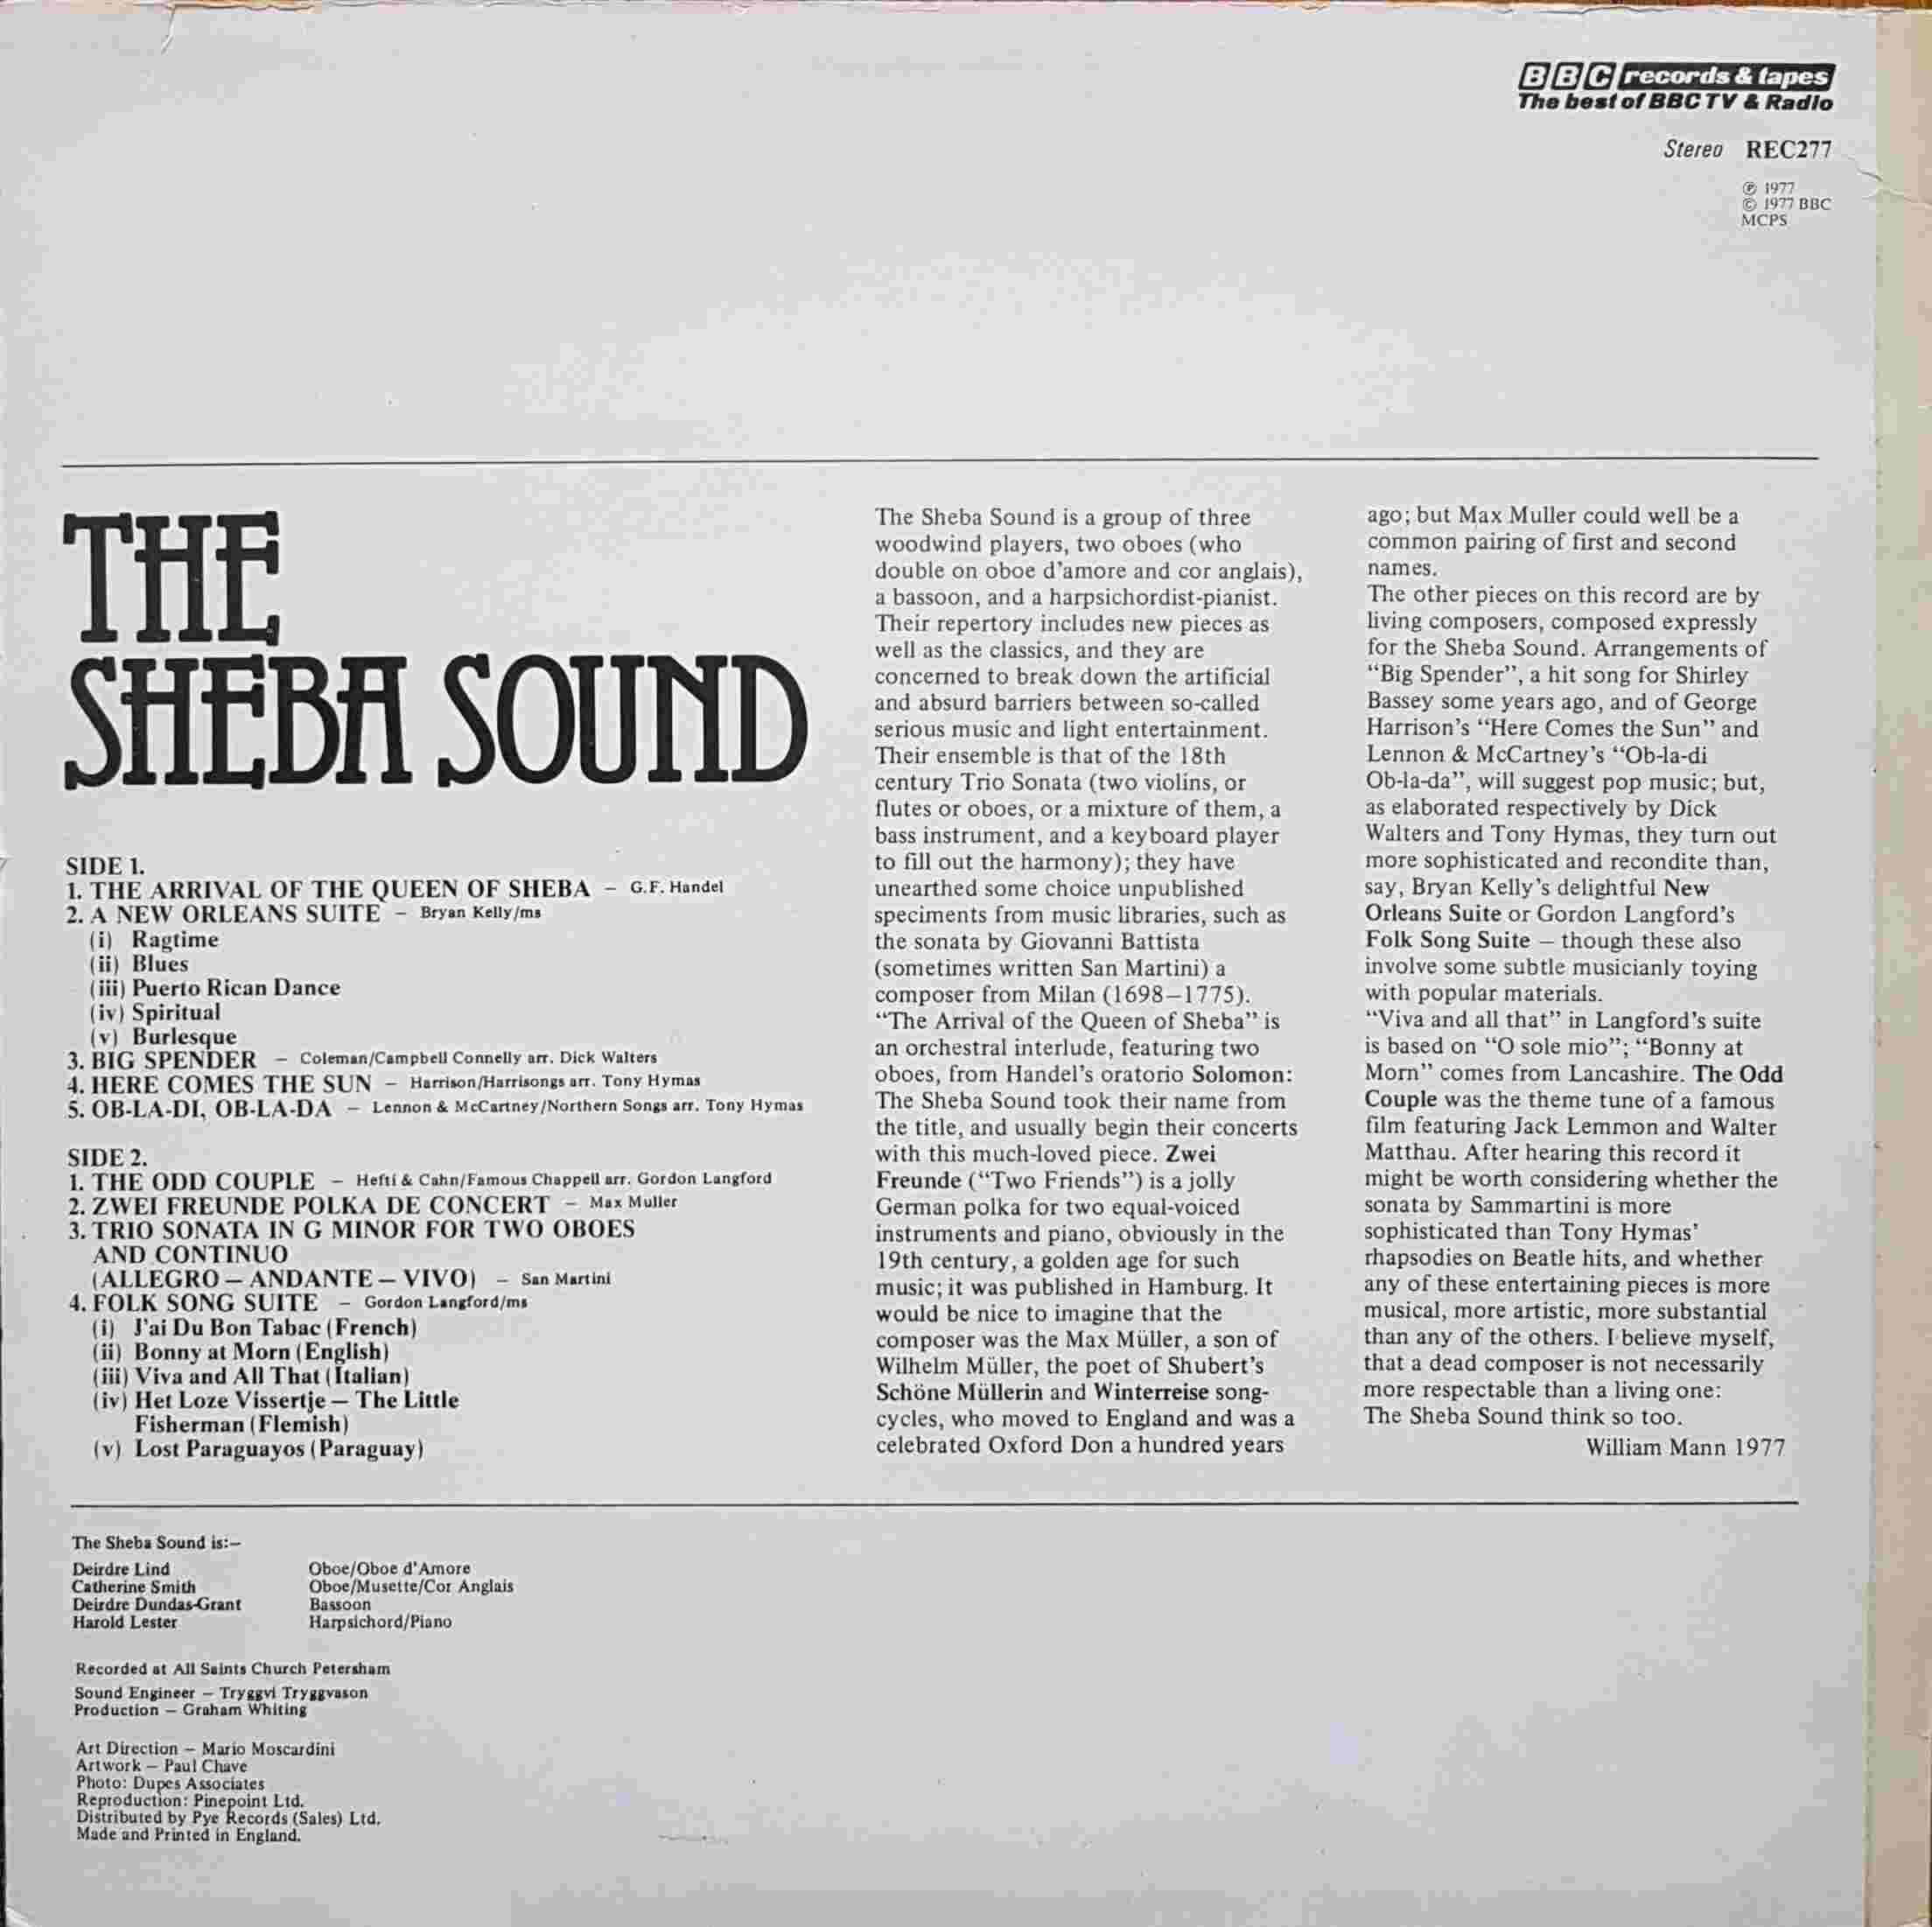 Picture of REC 277 The Sheba sound by artist The Sheba sound from the BBC records and Tapes library